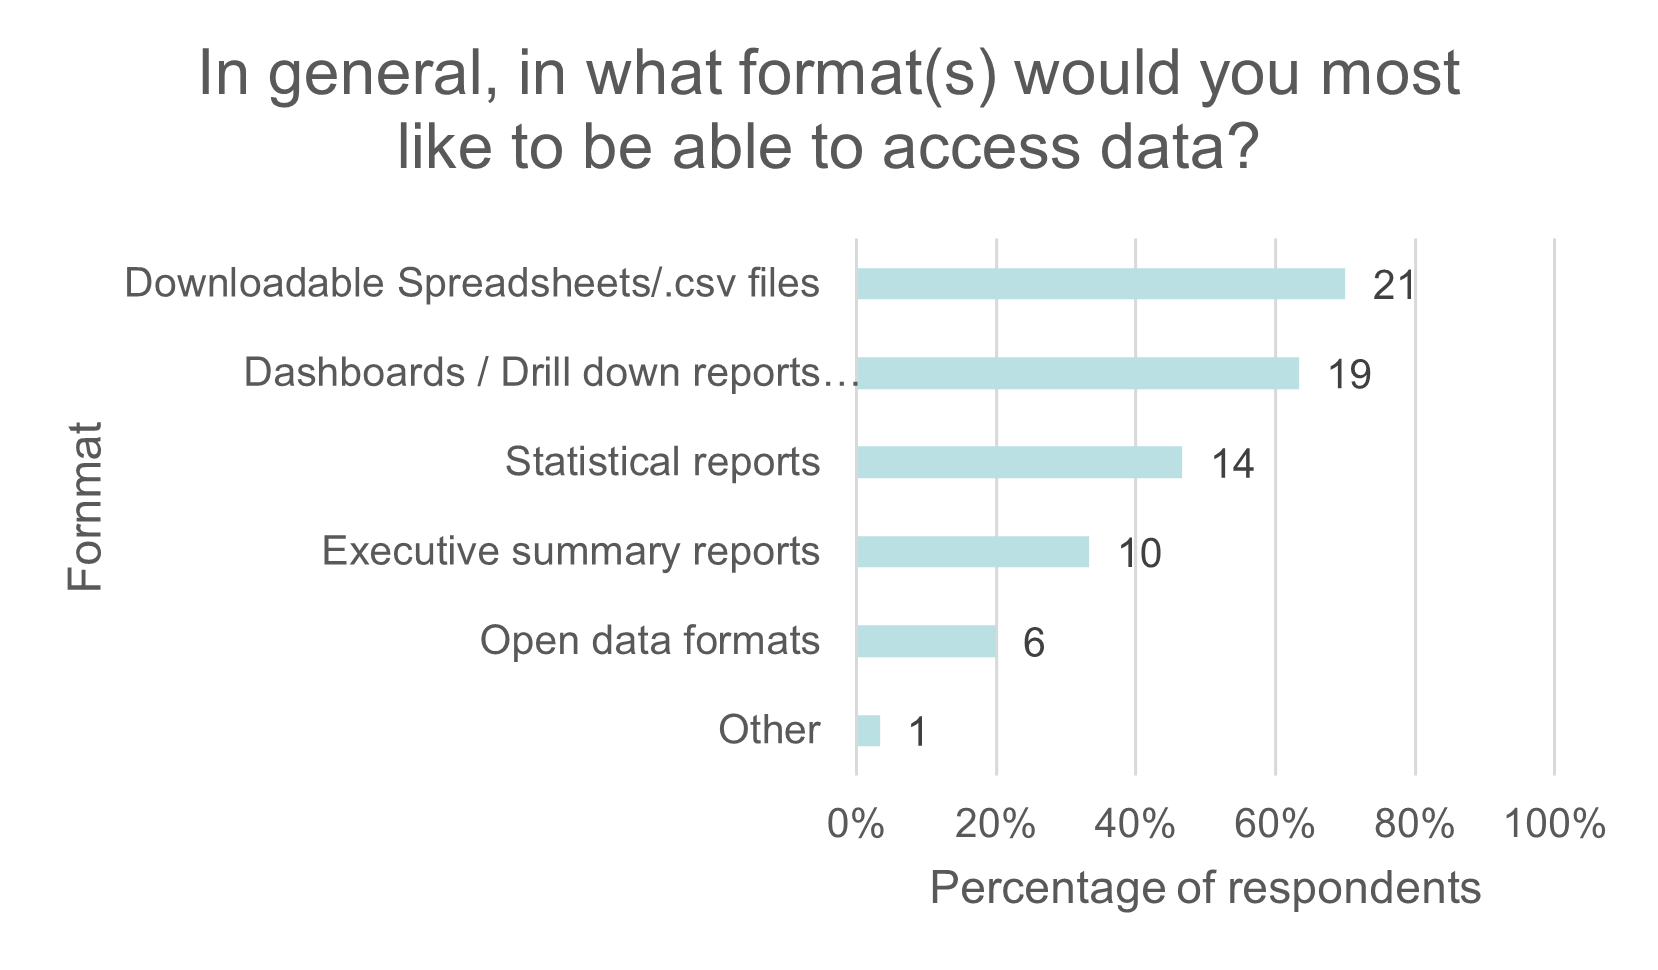 This chart shows the formats that respondents would like to access data in. It shows the percentage of respondents and the raw number of responses next to each row. The results are as follows: Downloadable Spreadsheets 21, Dashboard /Drill down reports 19, Statistical reports 14, Executive summary reports 10, Open data formats 6, Other 1.